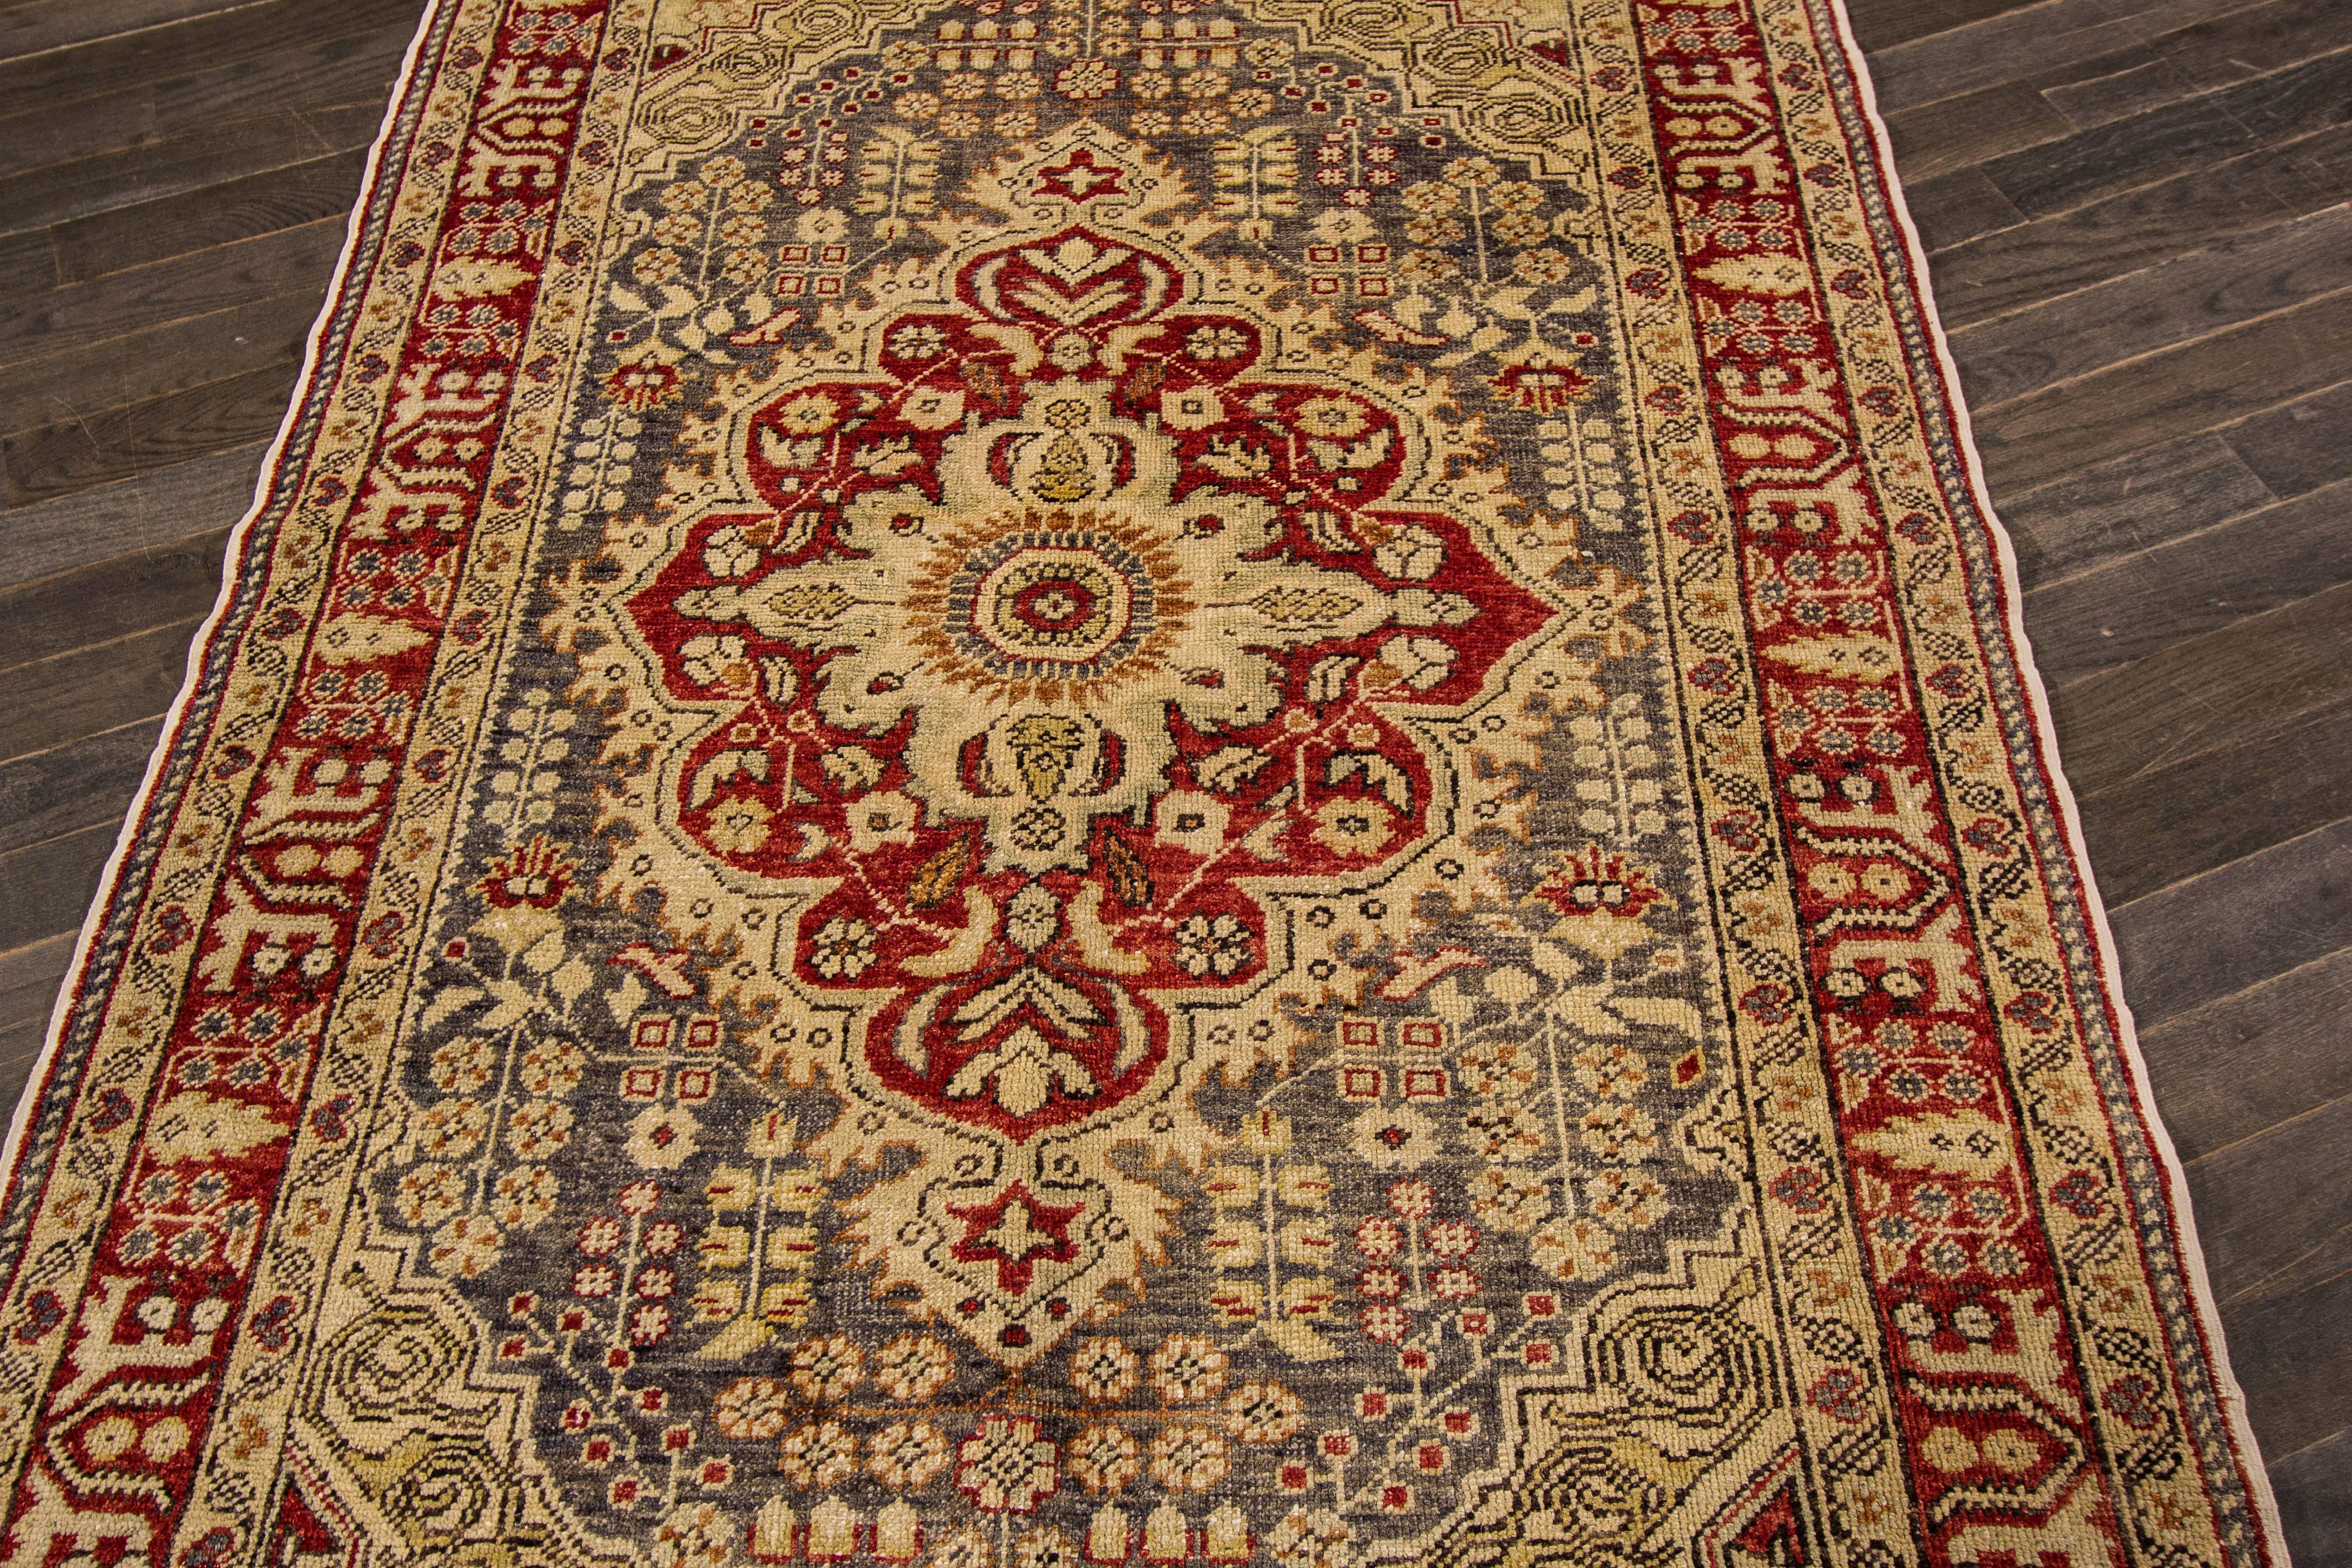 Vintage hand-knotted rug with a medallion design on a gray field with red borders.

This rug has magnificent detailing and would be perfect for any room. Measures: 4'4